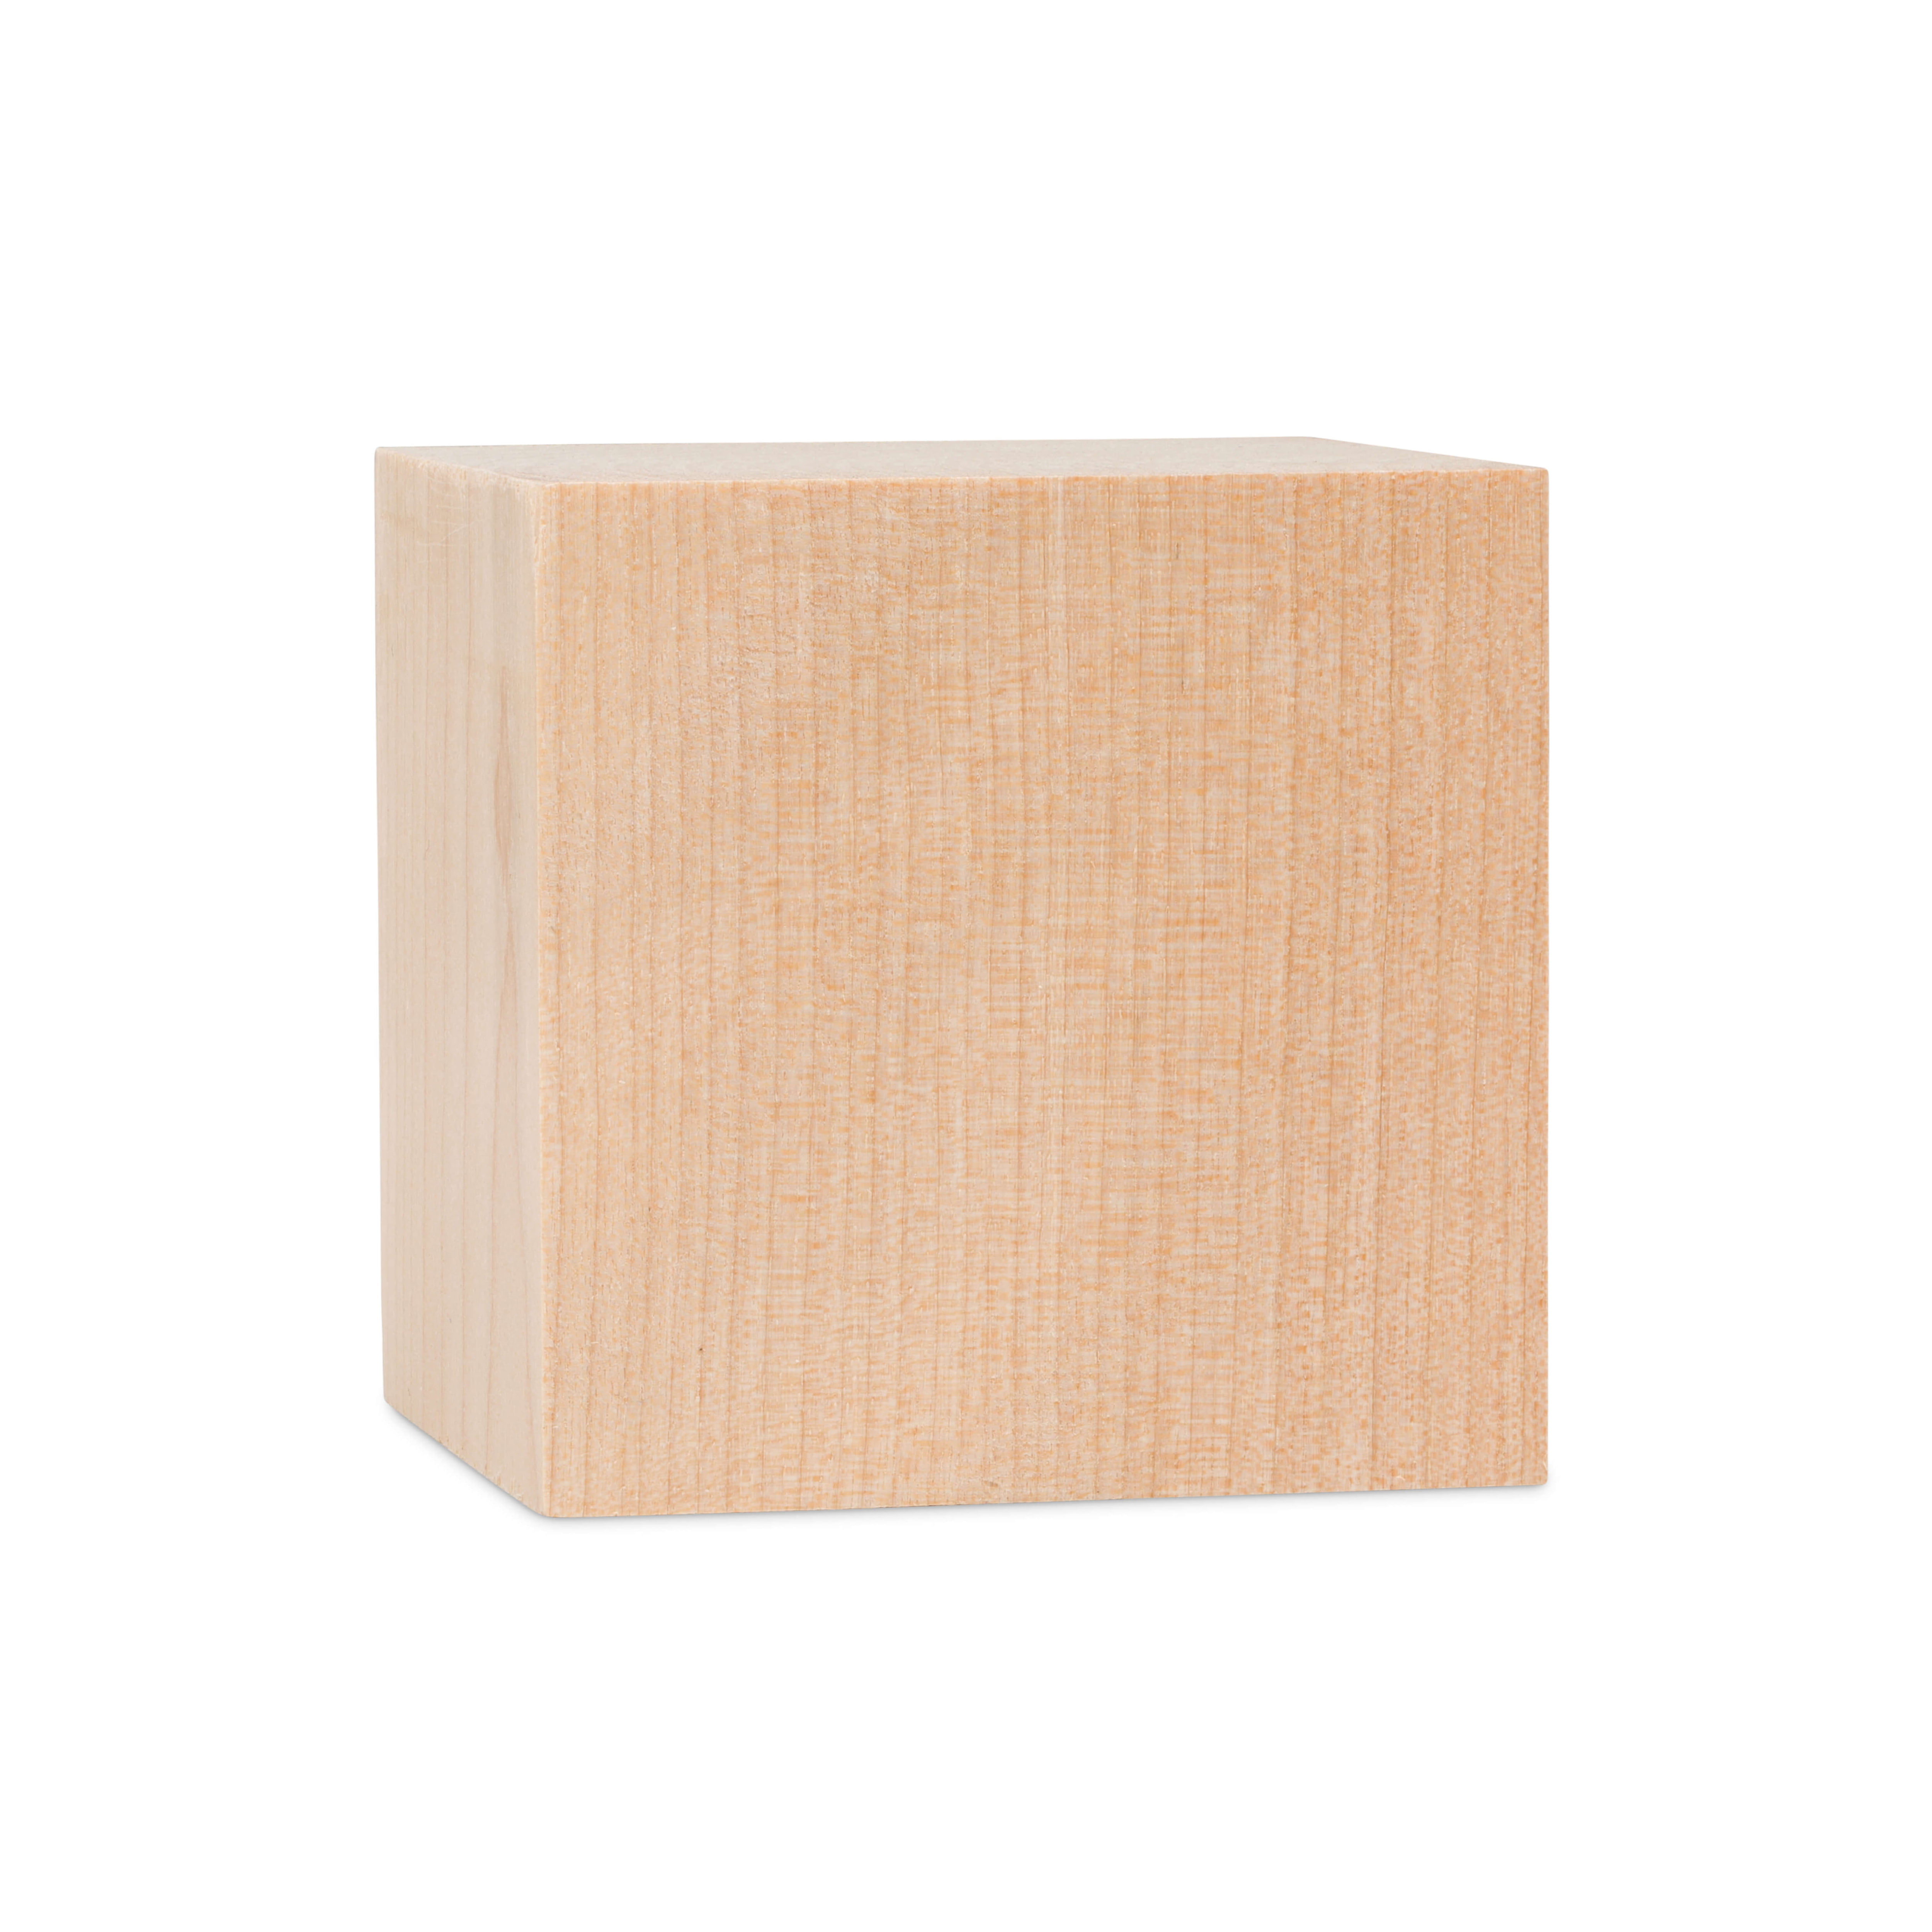 Blank Do-It-Yourself Wood Blocks / Cubes, 1-1/4 inch cube (Set of 12) –